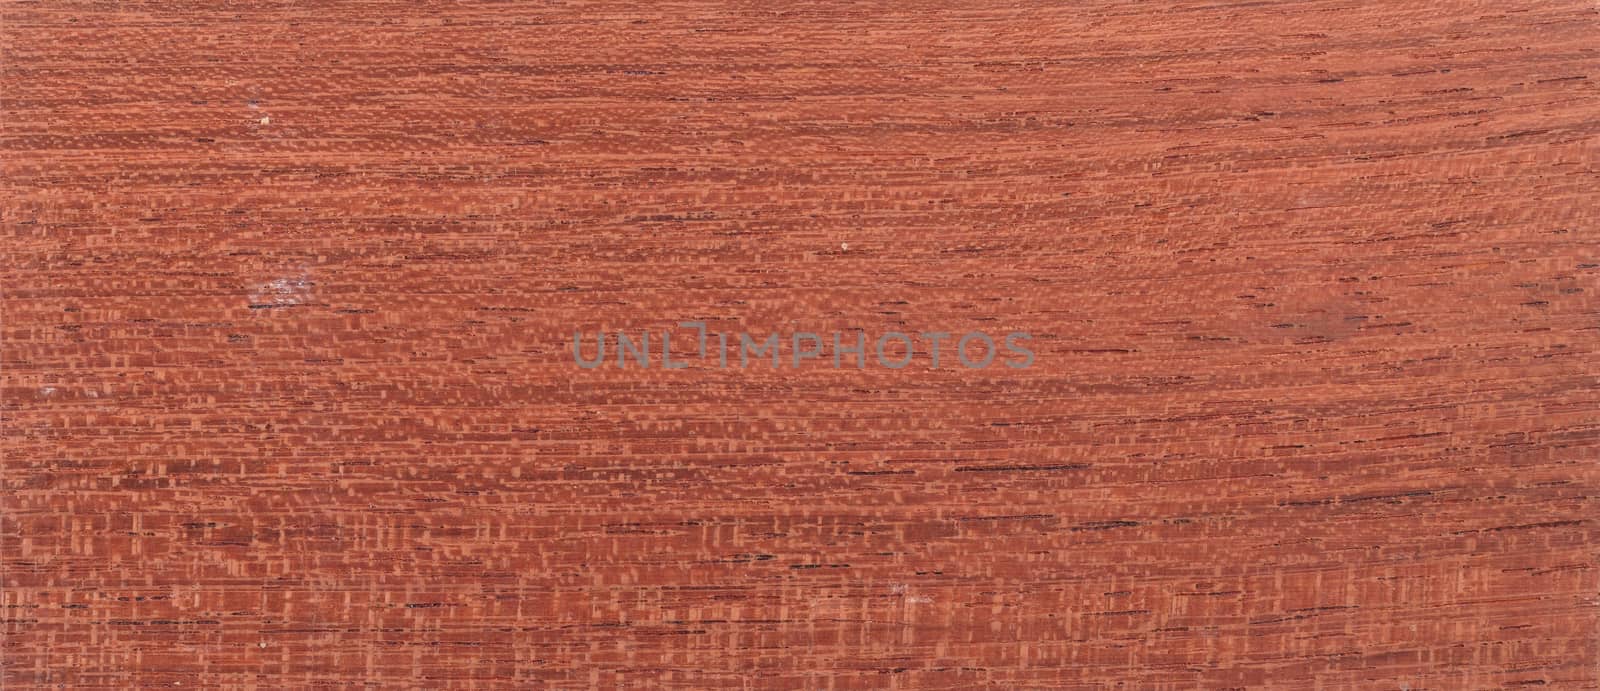 Wood background - Wood from the tropical rainforest - Suriname - Hymenaea courbaril